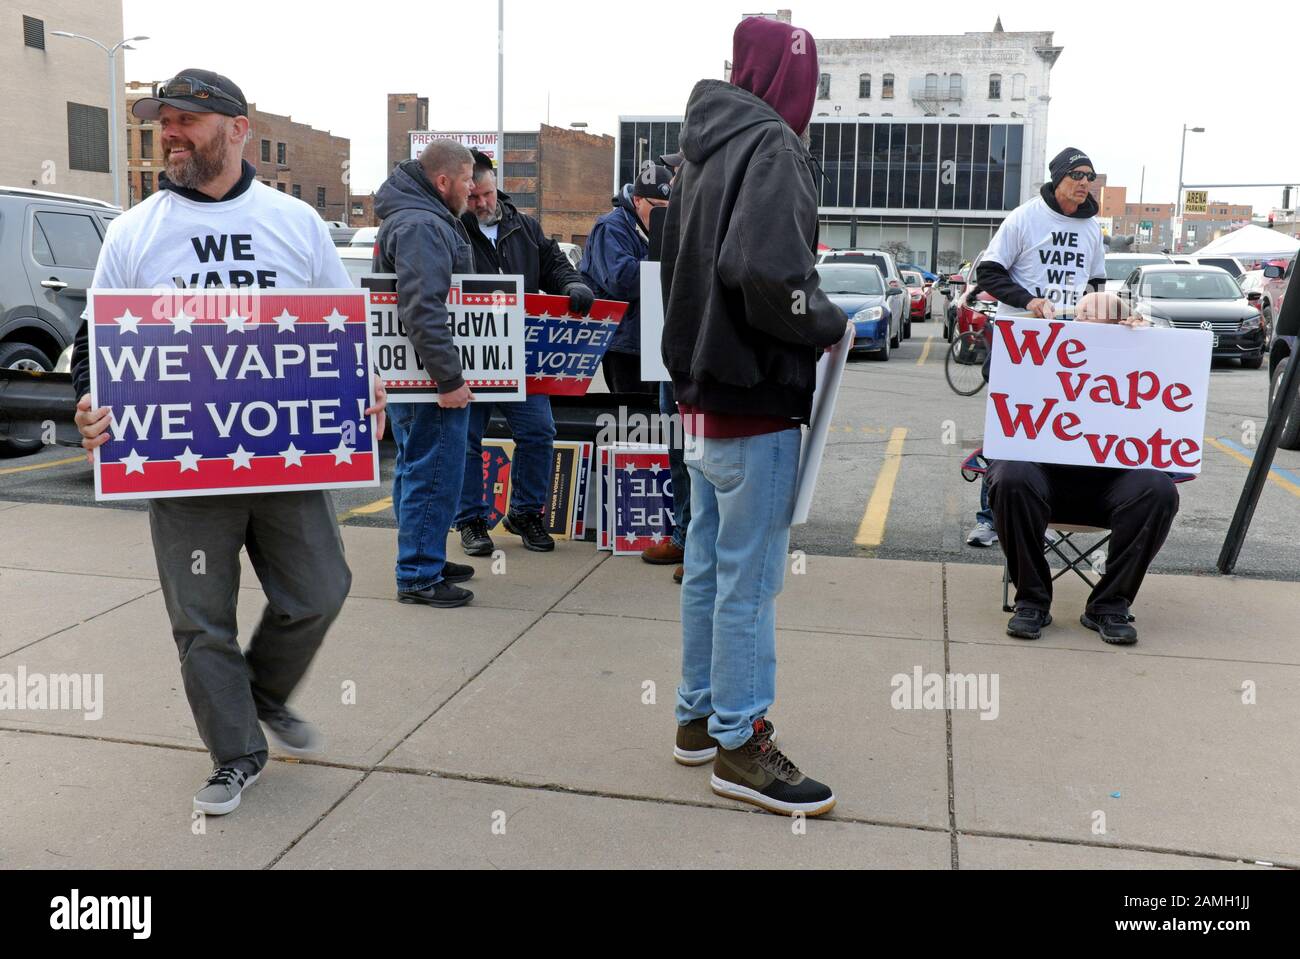 Pro-vape demonstrators stand outside with signs stating 'we vape we vote' rally in Toledo, Ohio during a visit from President Trump. Stock Photo